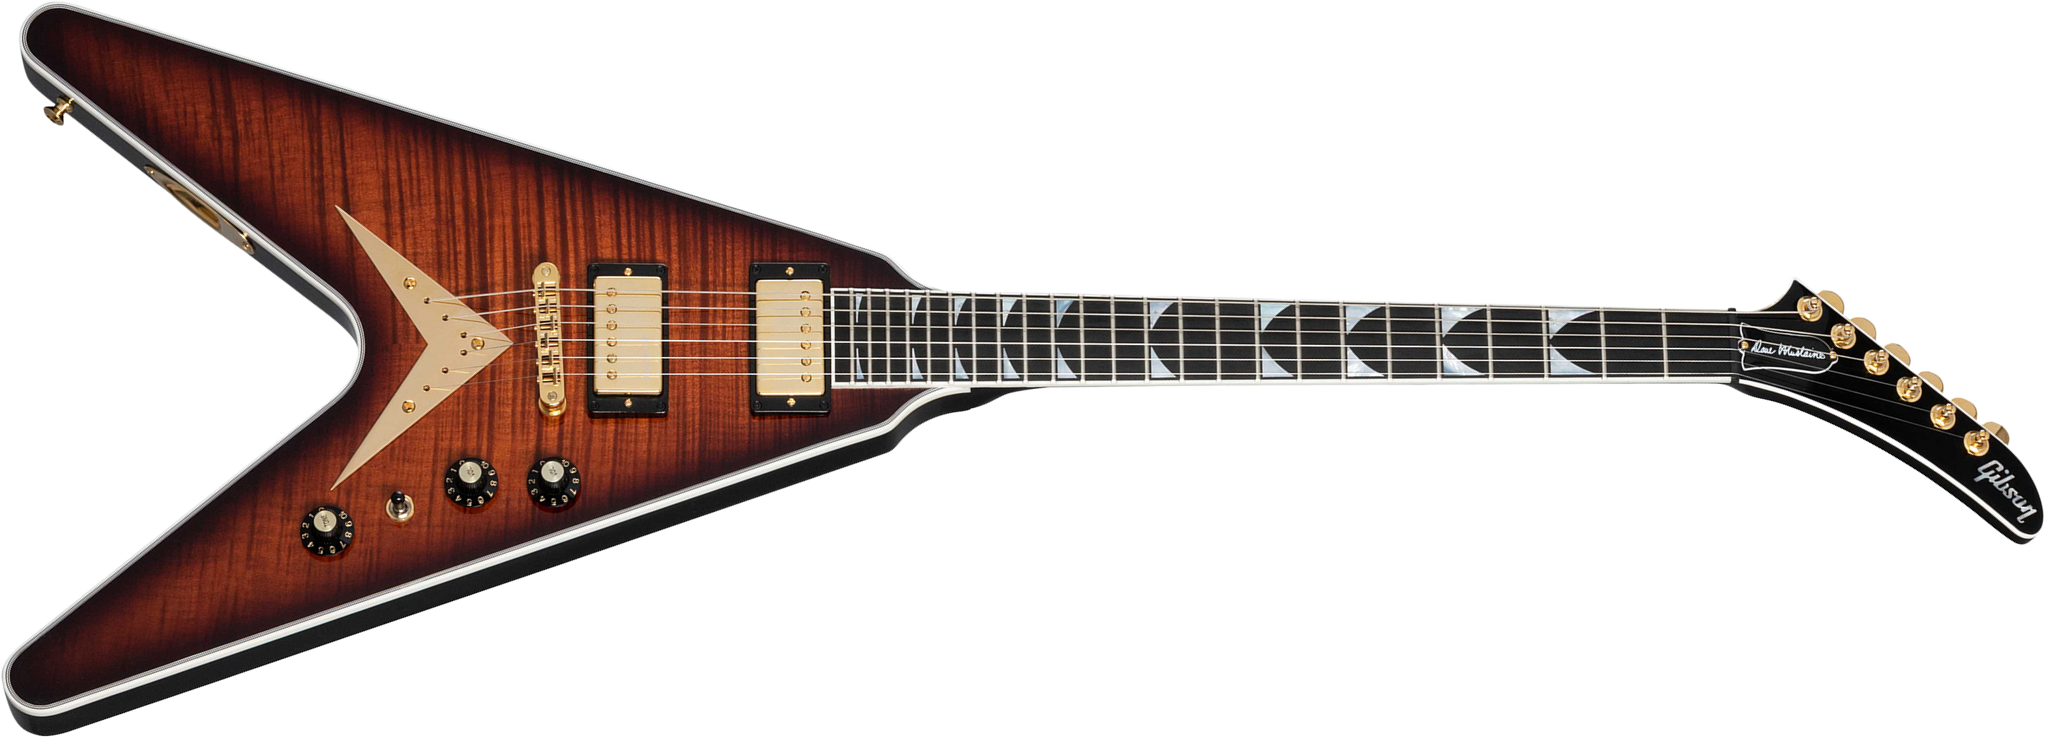 Gibson Custom Shop Dave Mustaine Flying V Exp Ltd Signature 2h Ht Eb - Red Amber Burst - Metal electric guitar - Main picture